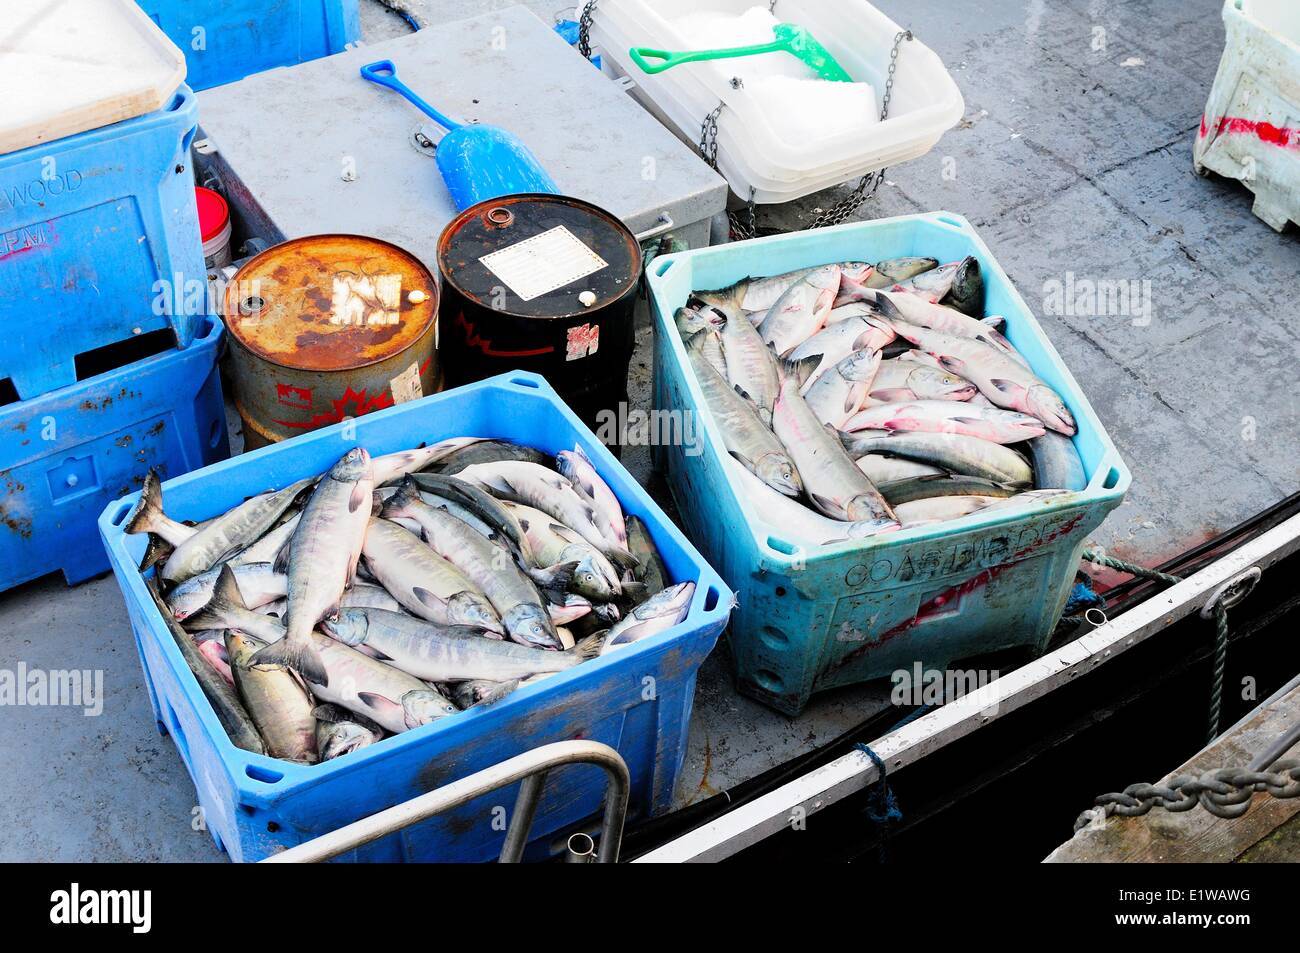 Chum salmon (Oncorhynchus keta) being stored in containers on a fish boat in Cowichan Bay, BC., Canada Stock Photo